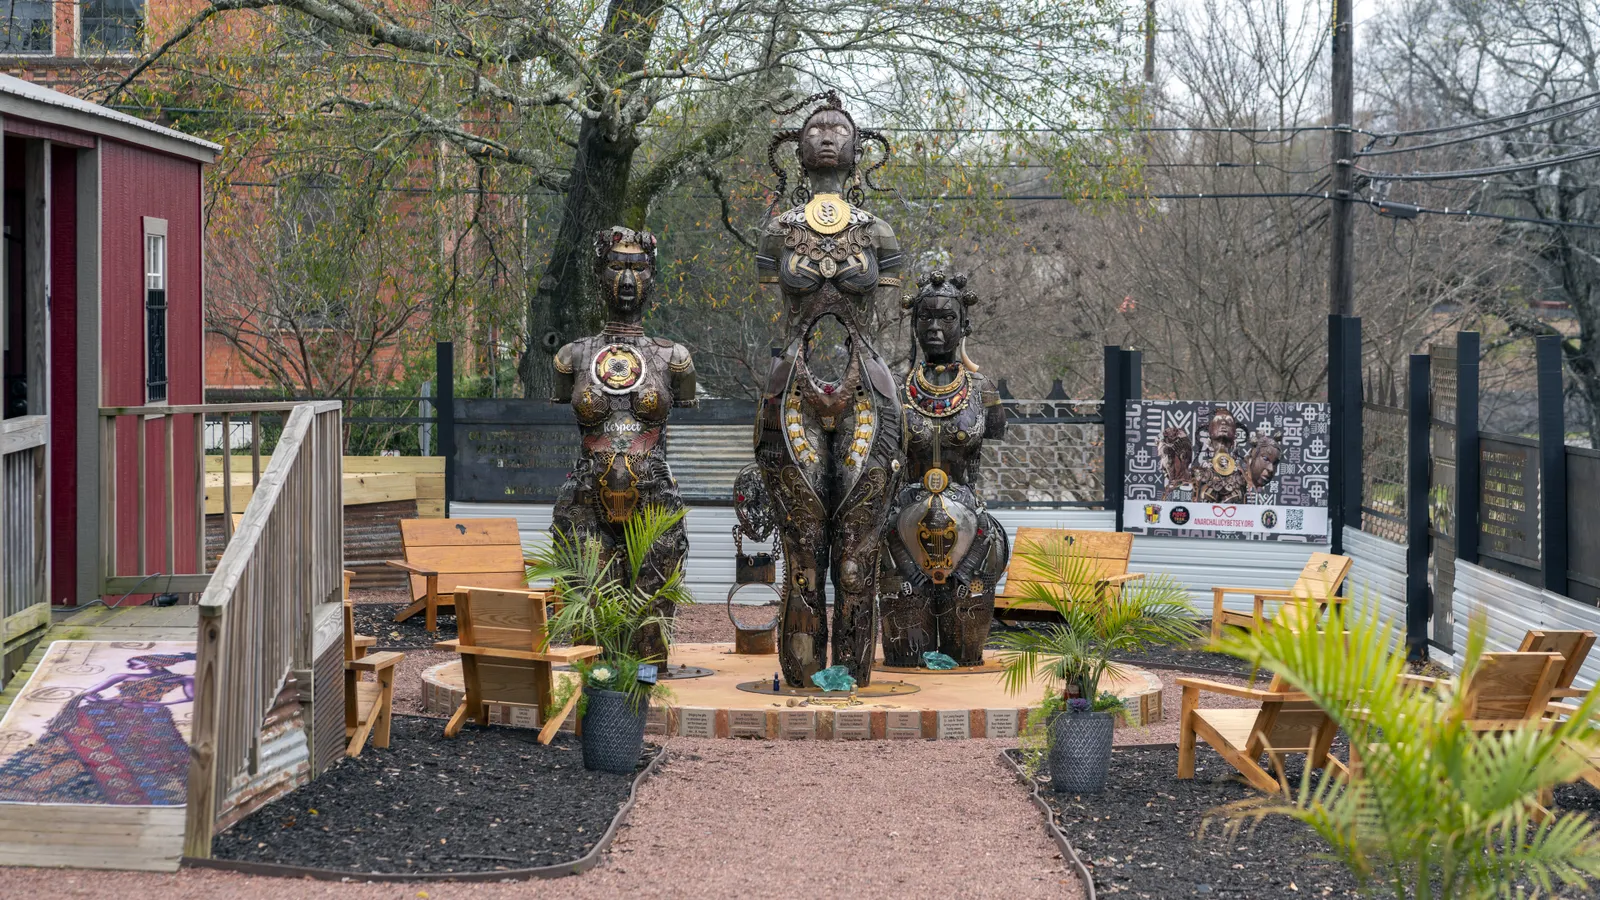 Subjected to Painful Experiments and Forgotten, Enslaved ‘Mothers of Gynecology’ Are Honored With New Monument | Smart News